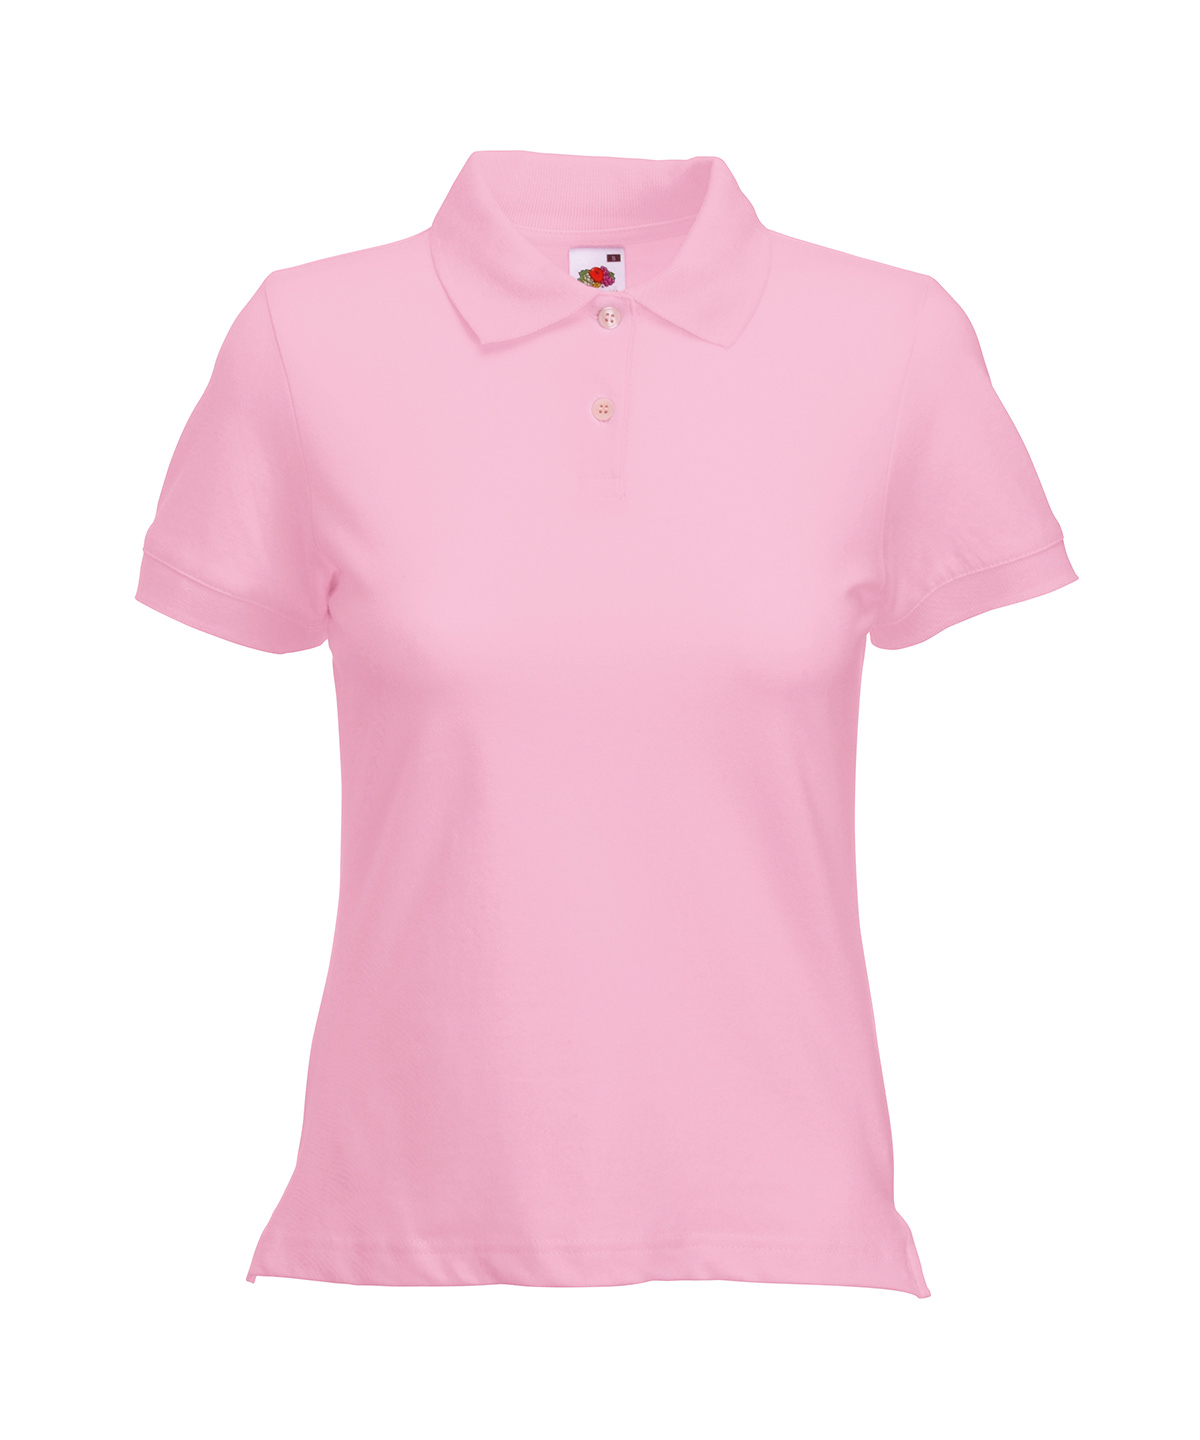 Fruit of the Loom Women's Lady-Fit Polo Shirt SS560